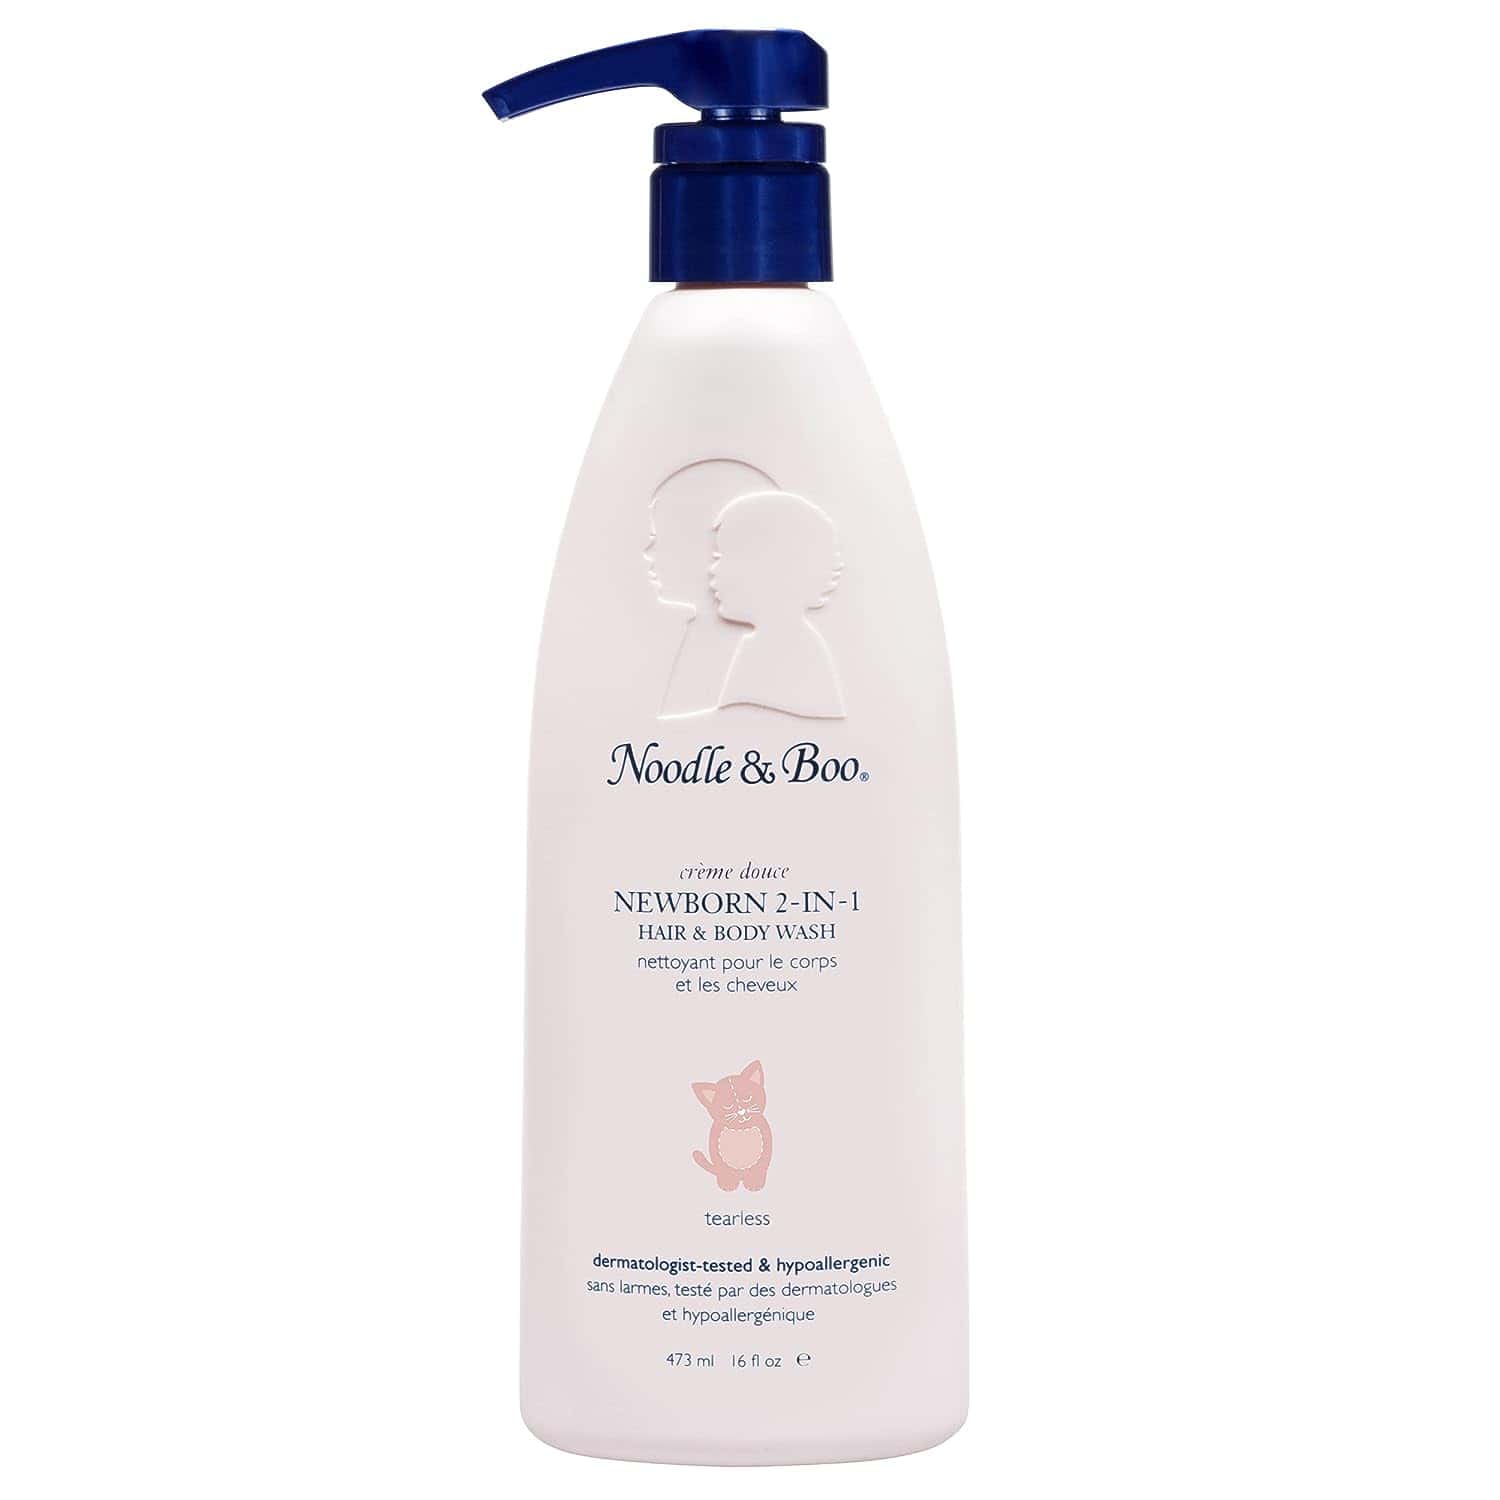 Noodle & Boo 2-in-1 Newborn Hair & Body Wash for Baby